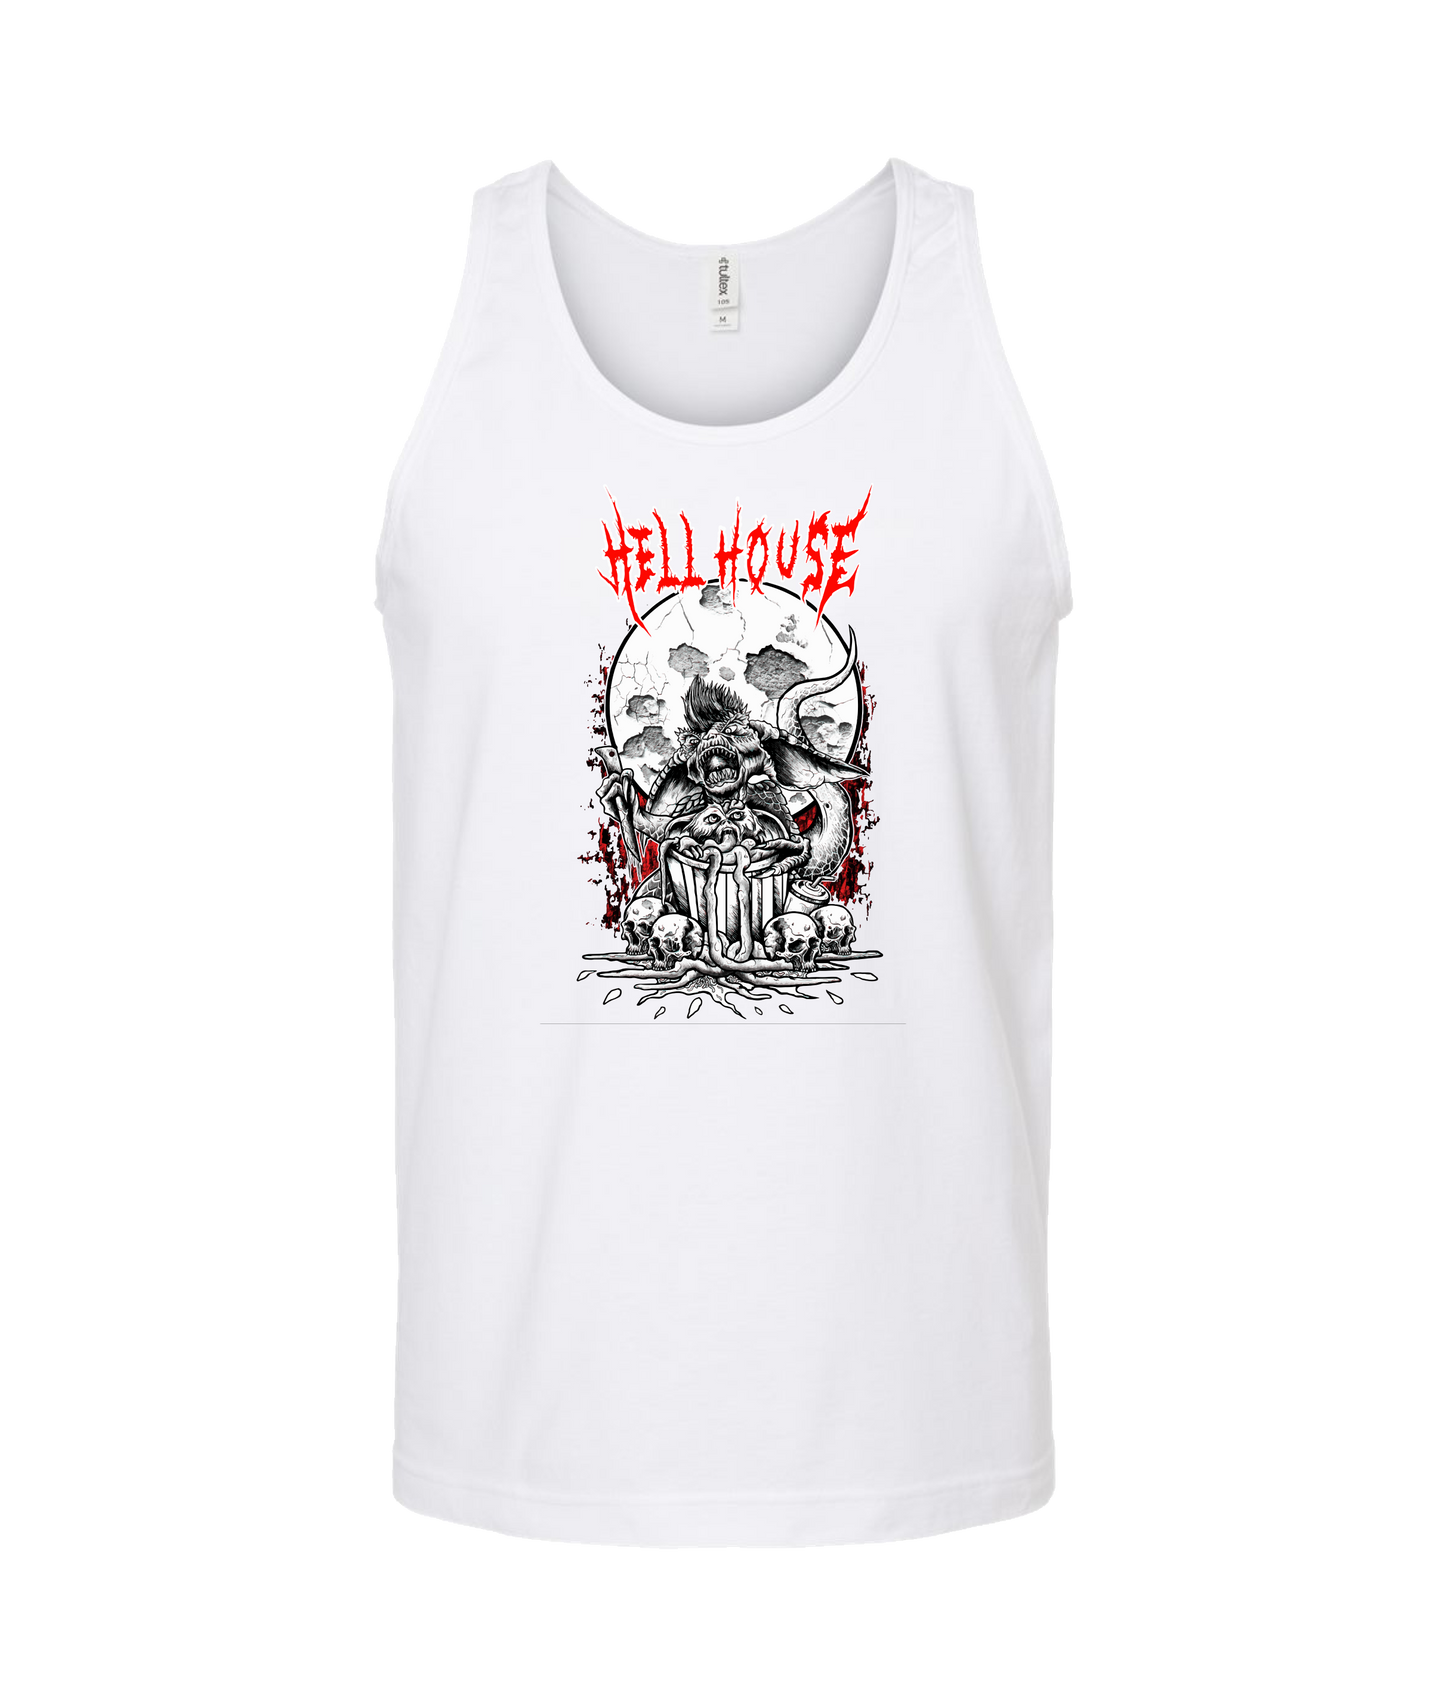 Hellhouse crypt - GREMLINS - White Tank Top